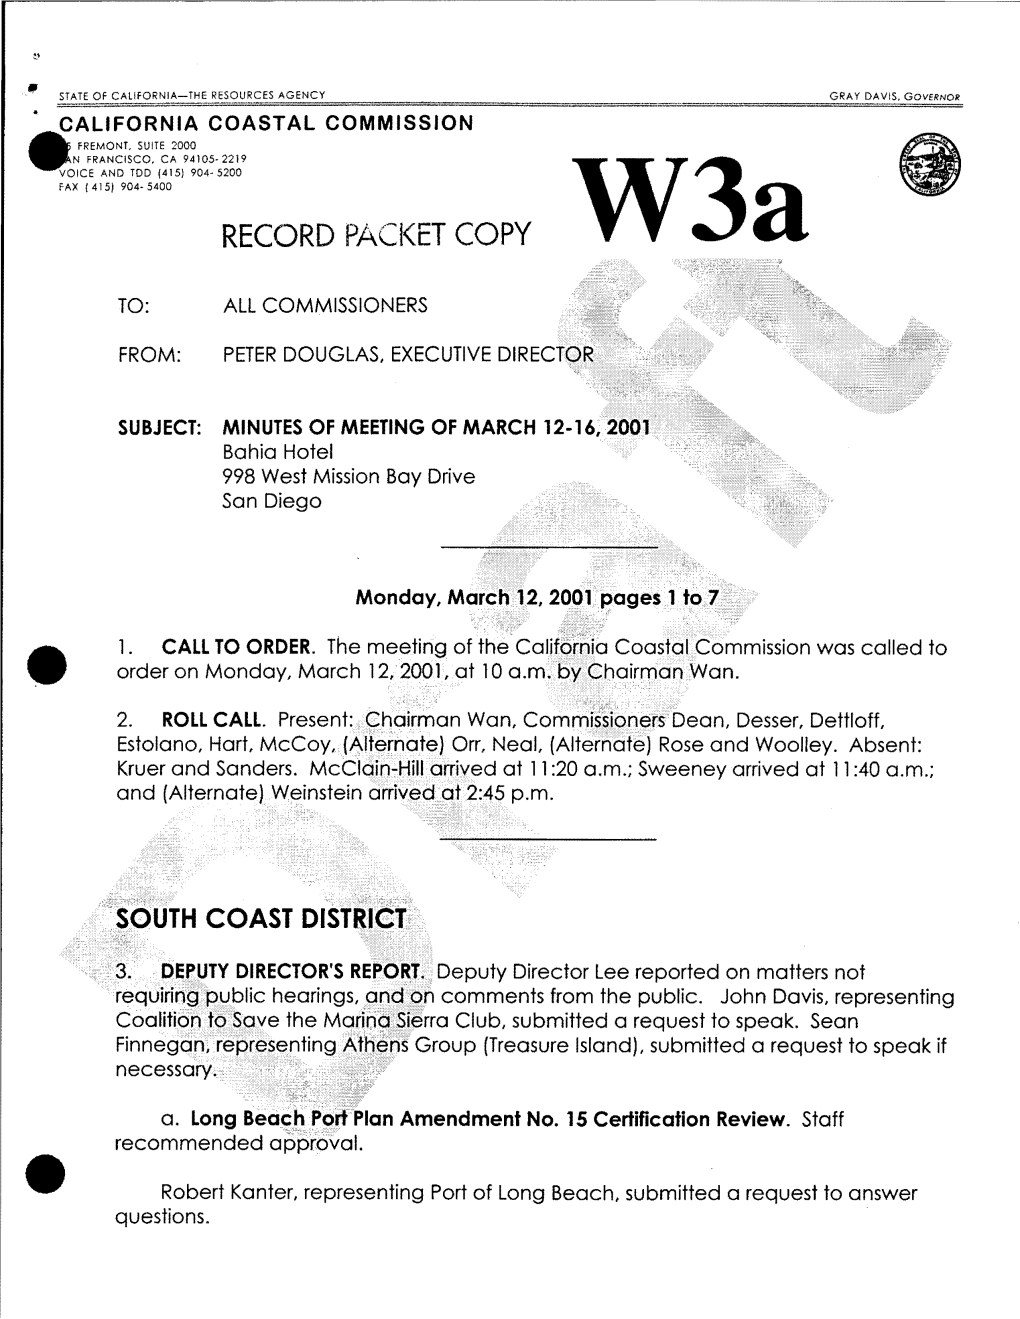 RECORD PACKET COPY W3a